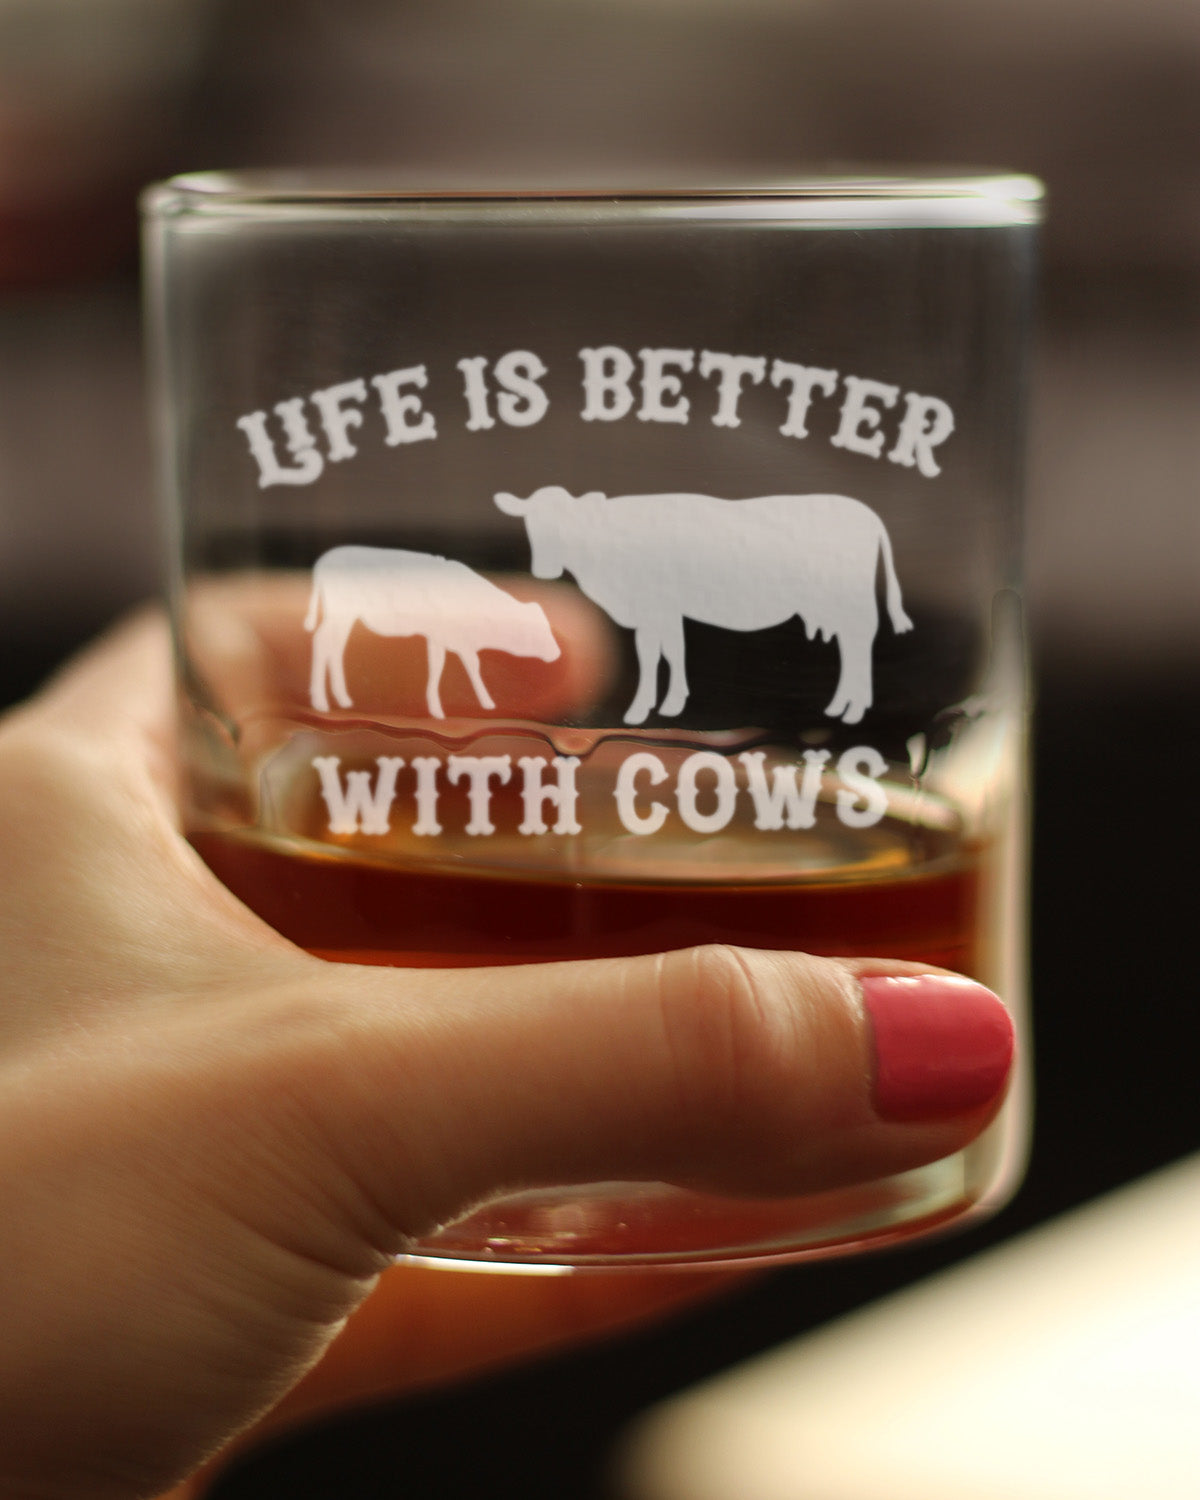 Life Is Better With Cows - Whiskey Rocks Glass Gifts - Funny Cow Gifts and Decor for Men &amp; Women - 10.25 Oz Glasses